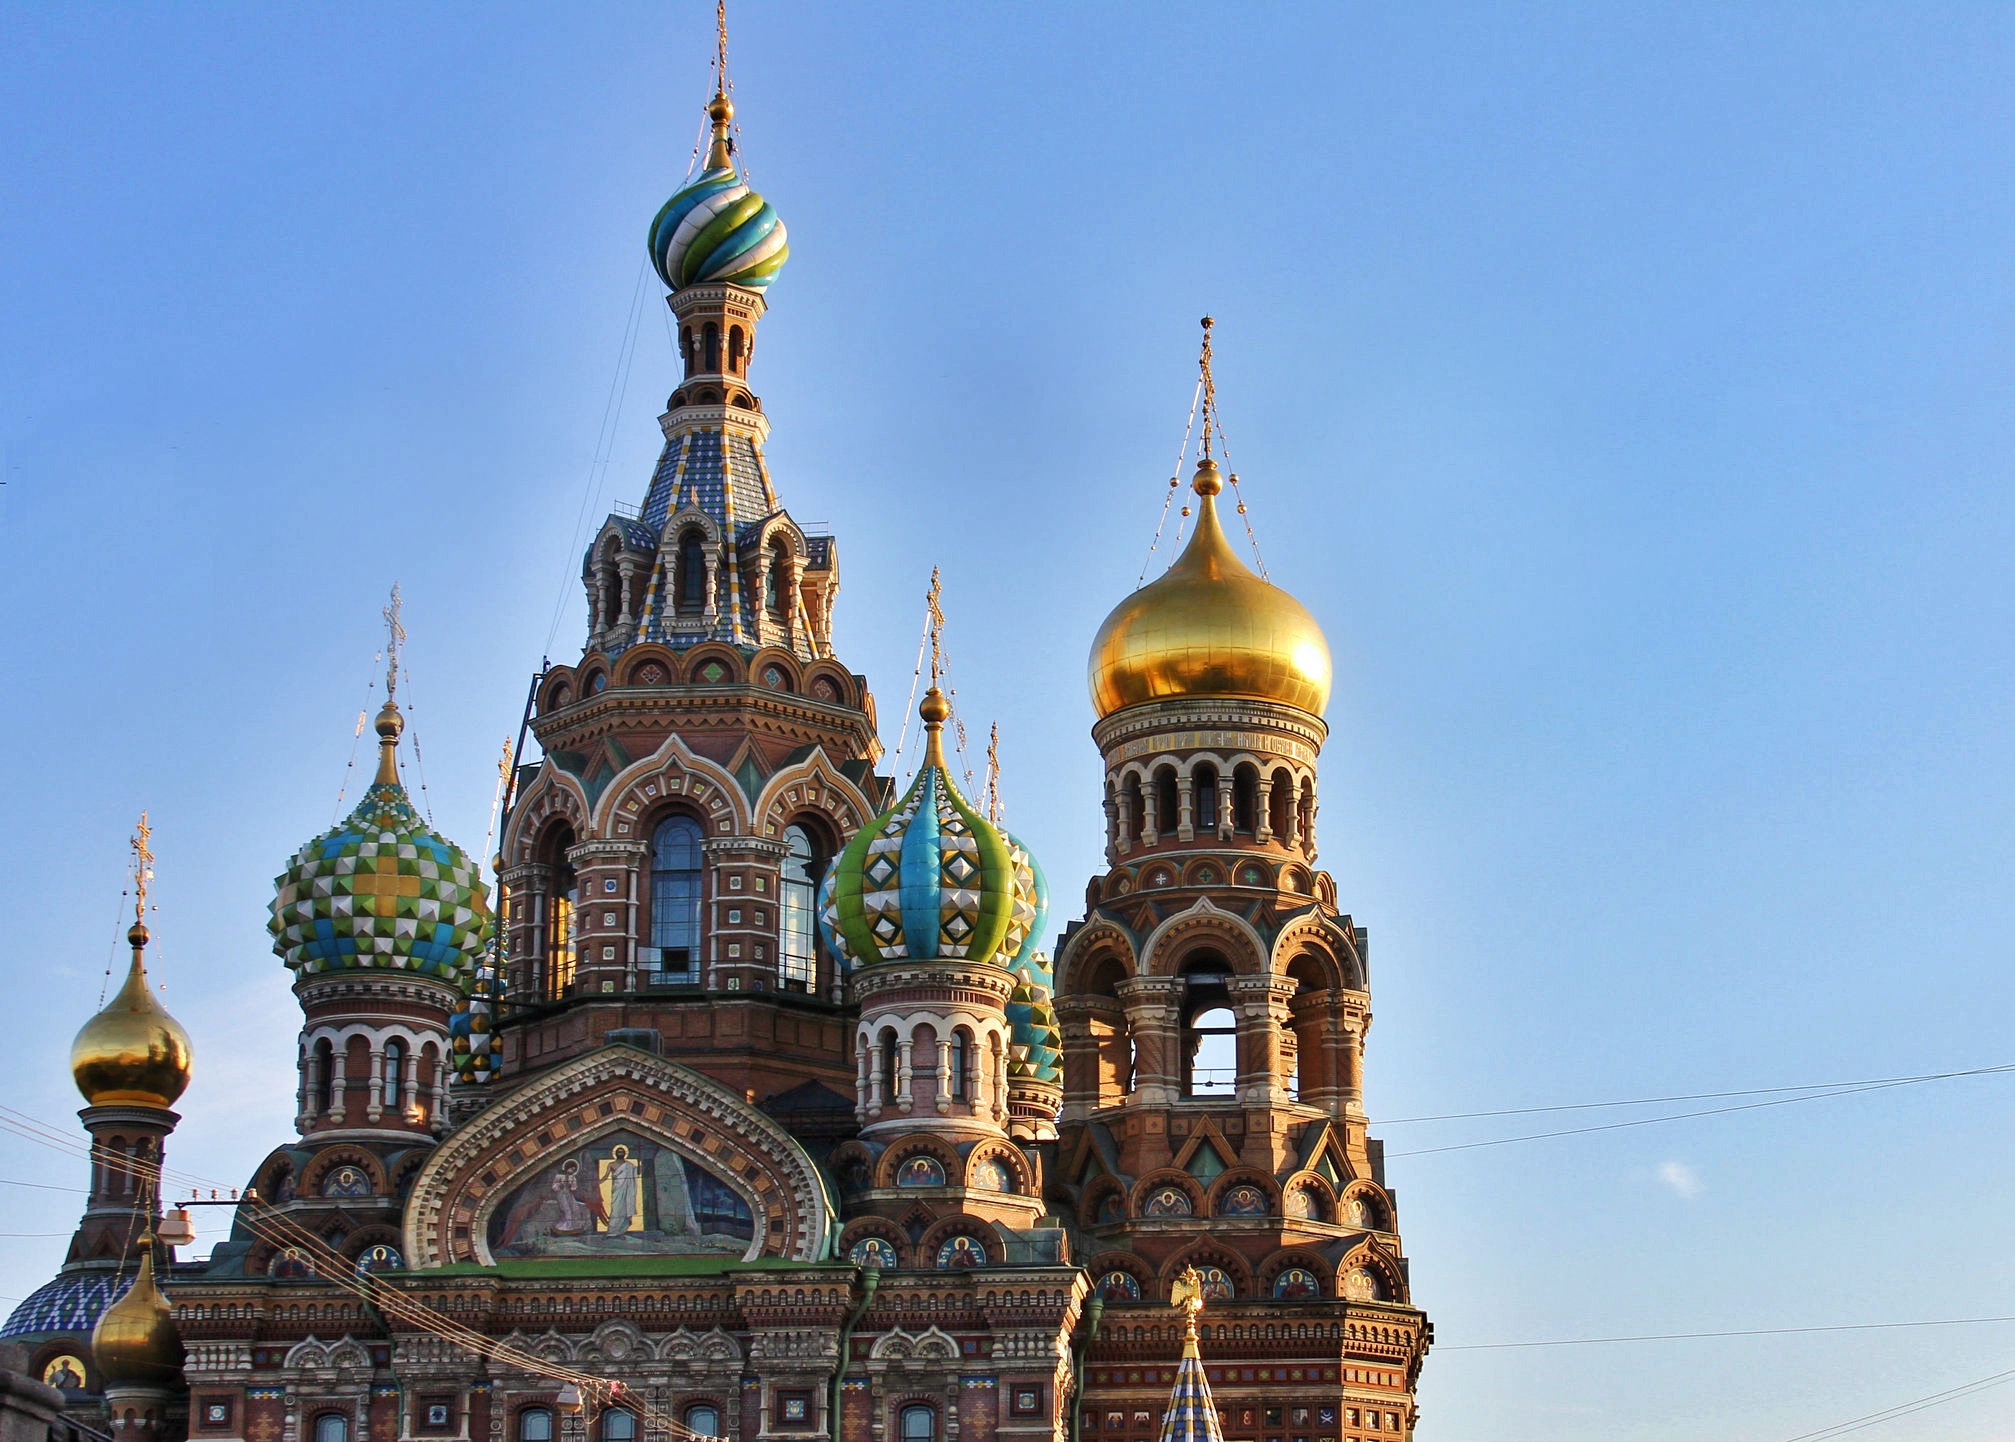 Church of our Savior on Spilled Blood, Russia